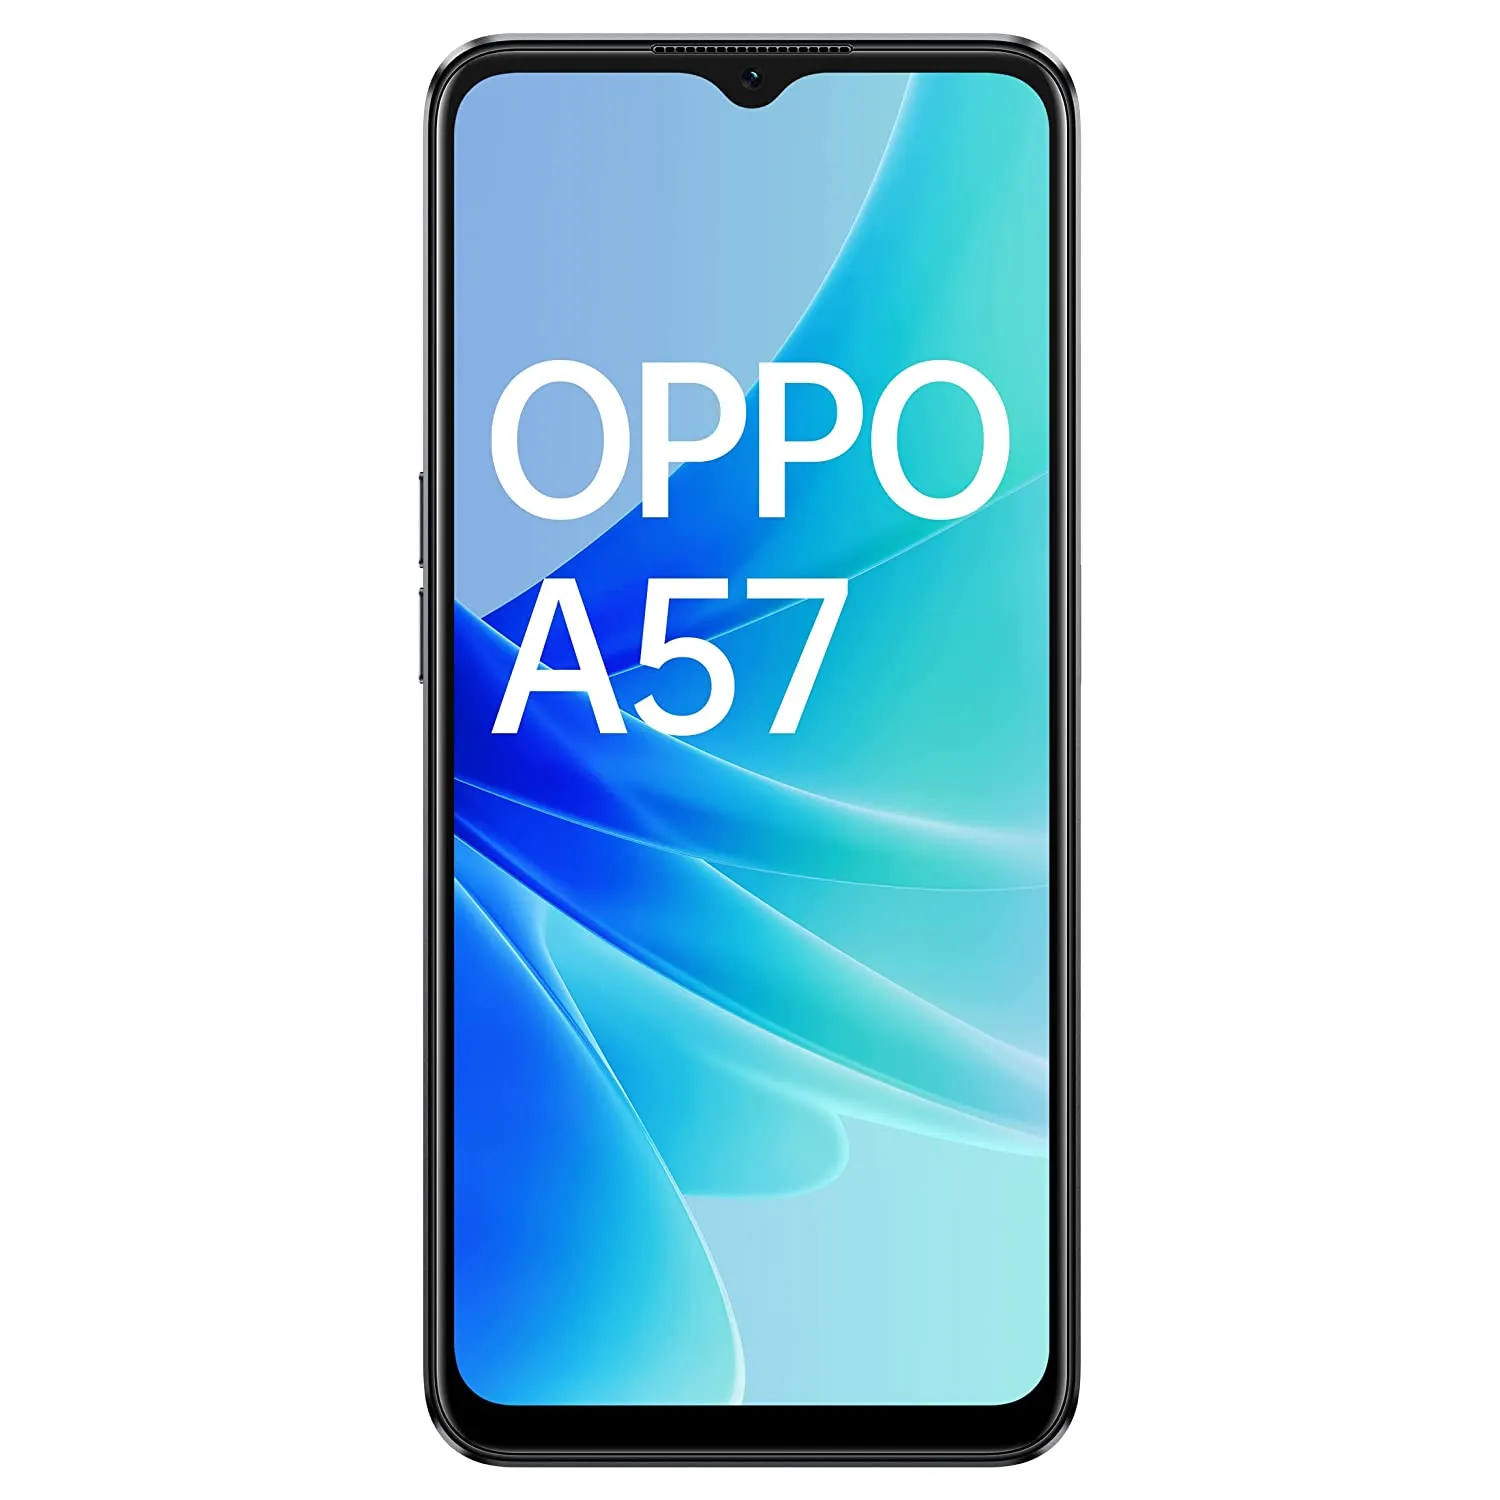 Oppo Android Smartphone A57 (4GB RAM, 64GB Storage/ROM) CPH2387 Black